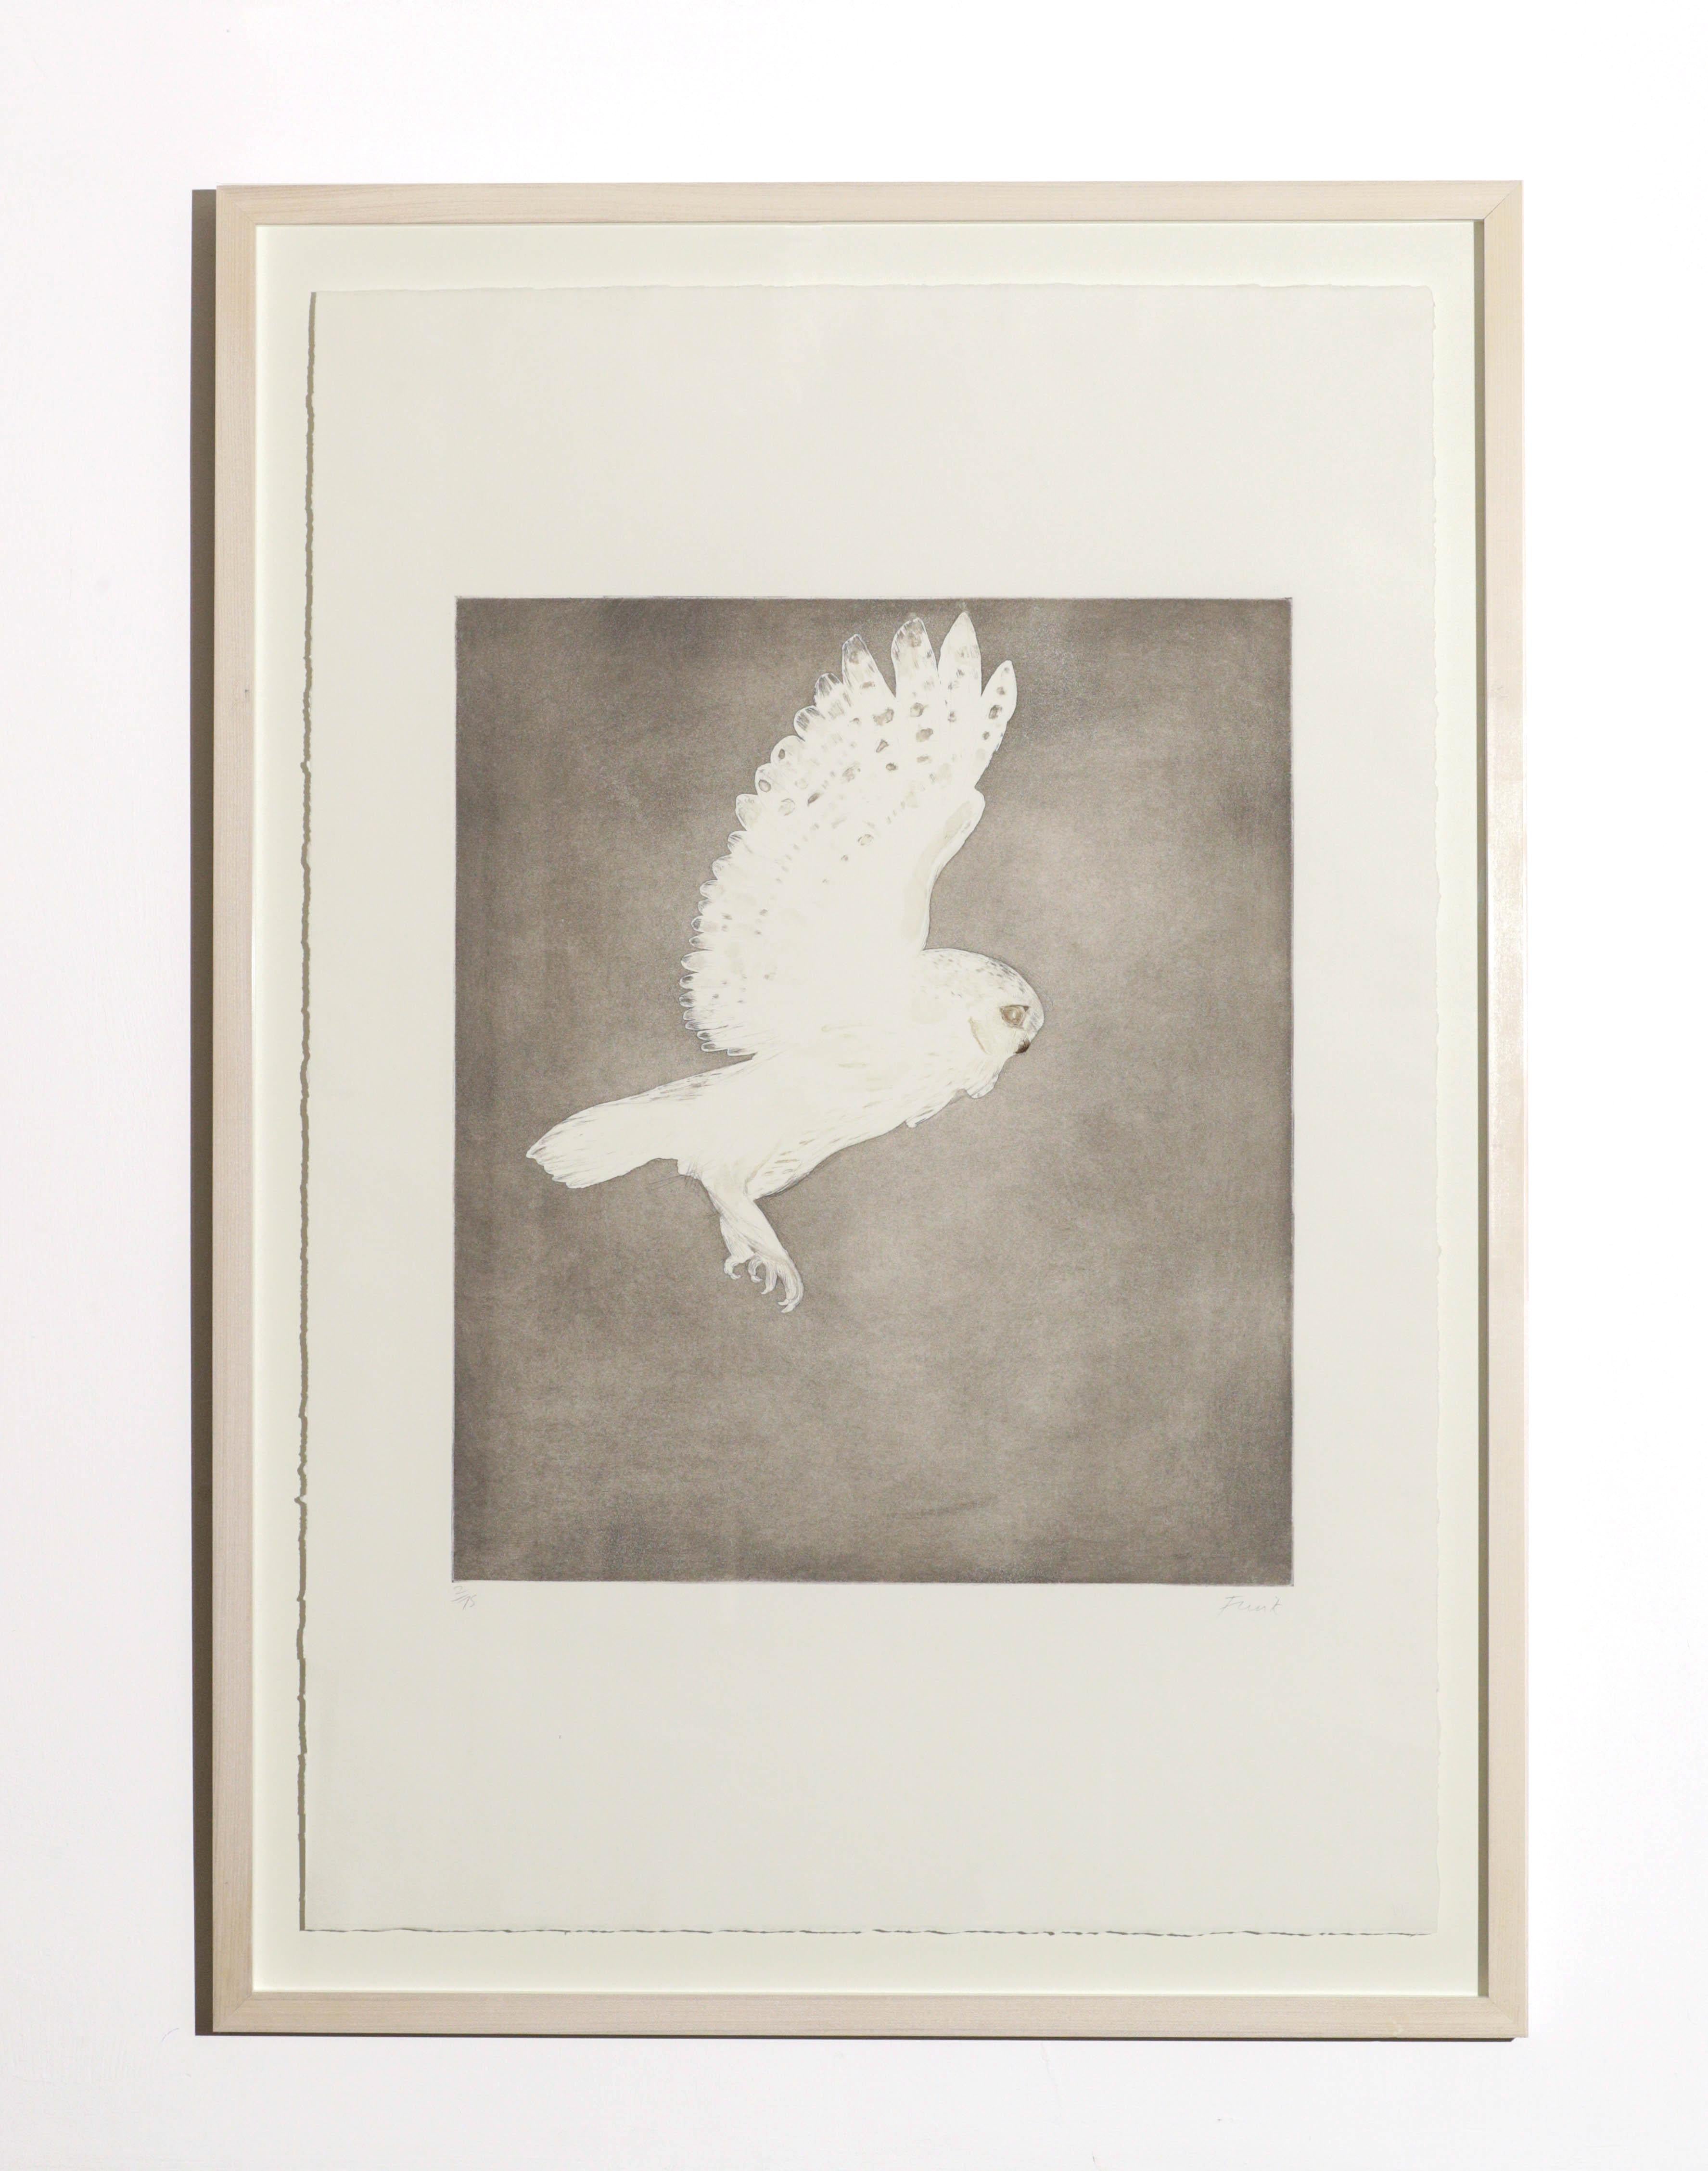 From 'Six Owl Series' conceived in 1977 by Dame Elizabeth Frink. Etching with aquatint in colors, on wove paper, signed, FRINK, lower right, and numbered 2 from the edition of 75 in pencil, lower left, printed at White Ink Ltd., published by Leslie